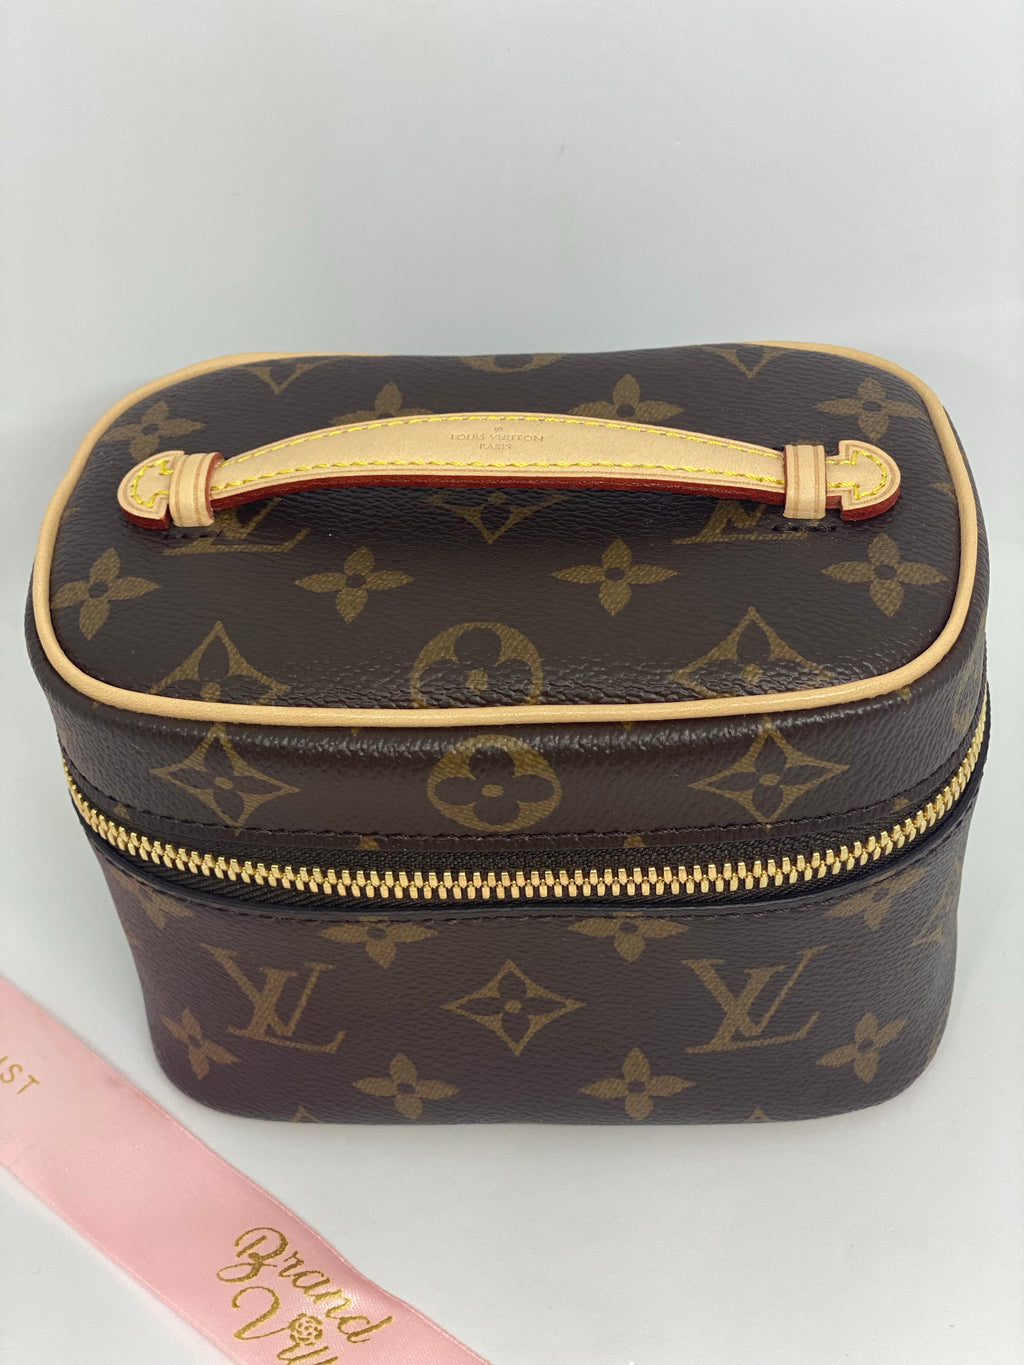 Louis Vuitton Nice Nano Review/How to use it & what fits?? 